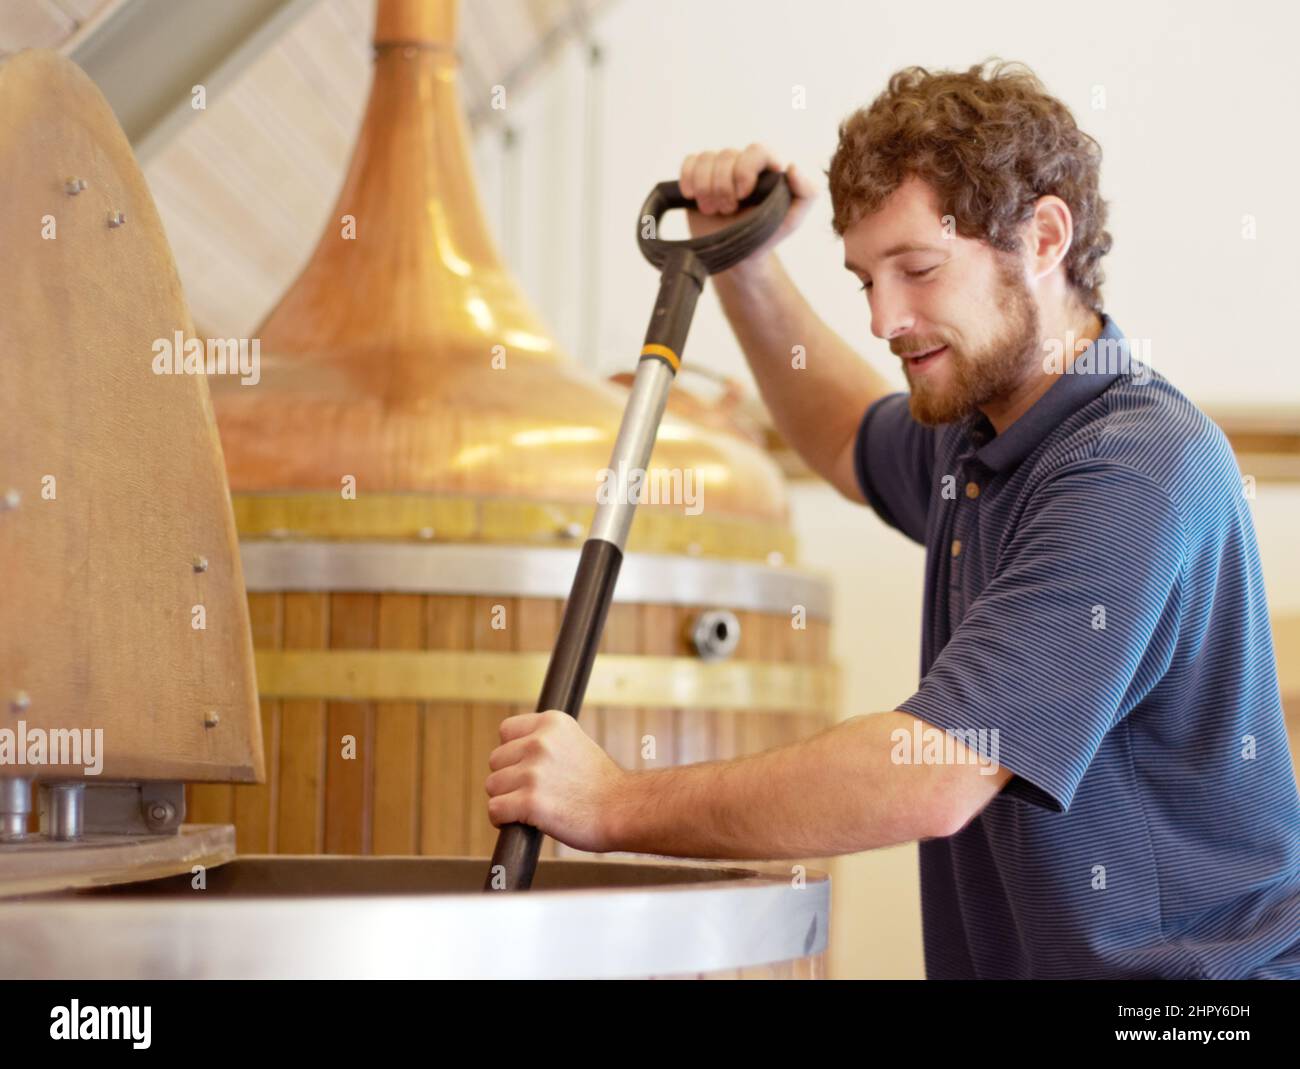 Brewing the best. Shot of a young man working on a batch of beer in a brewery. Stock Photo